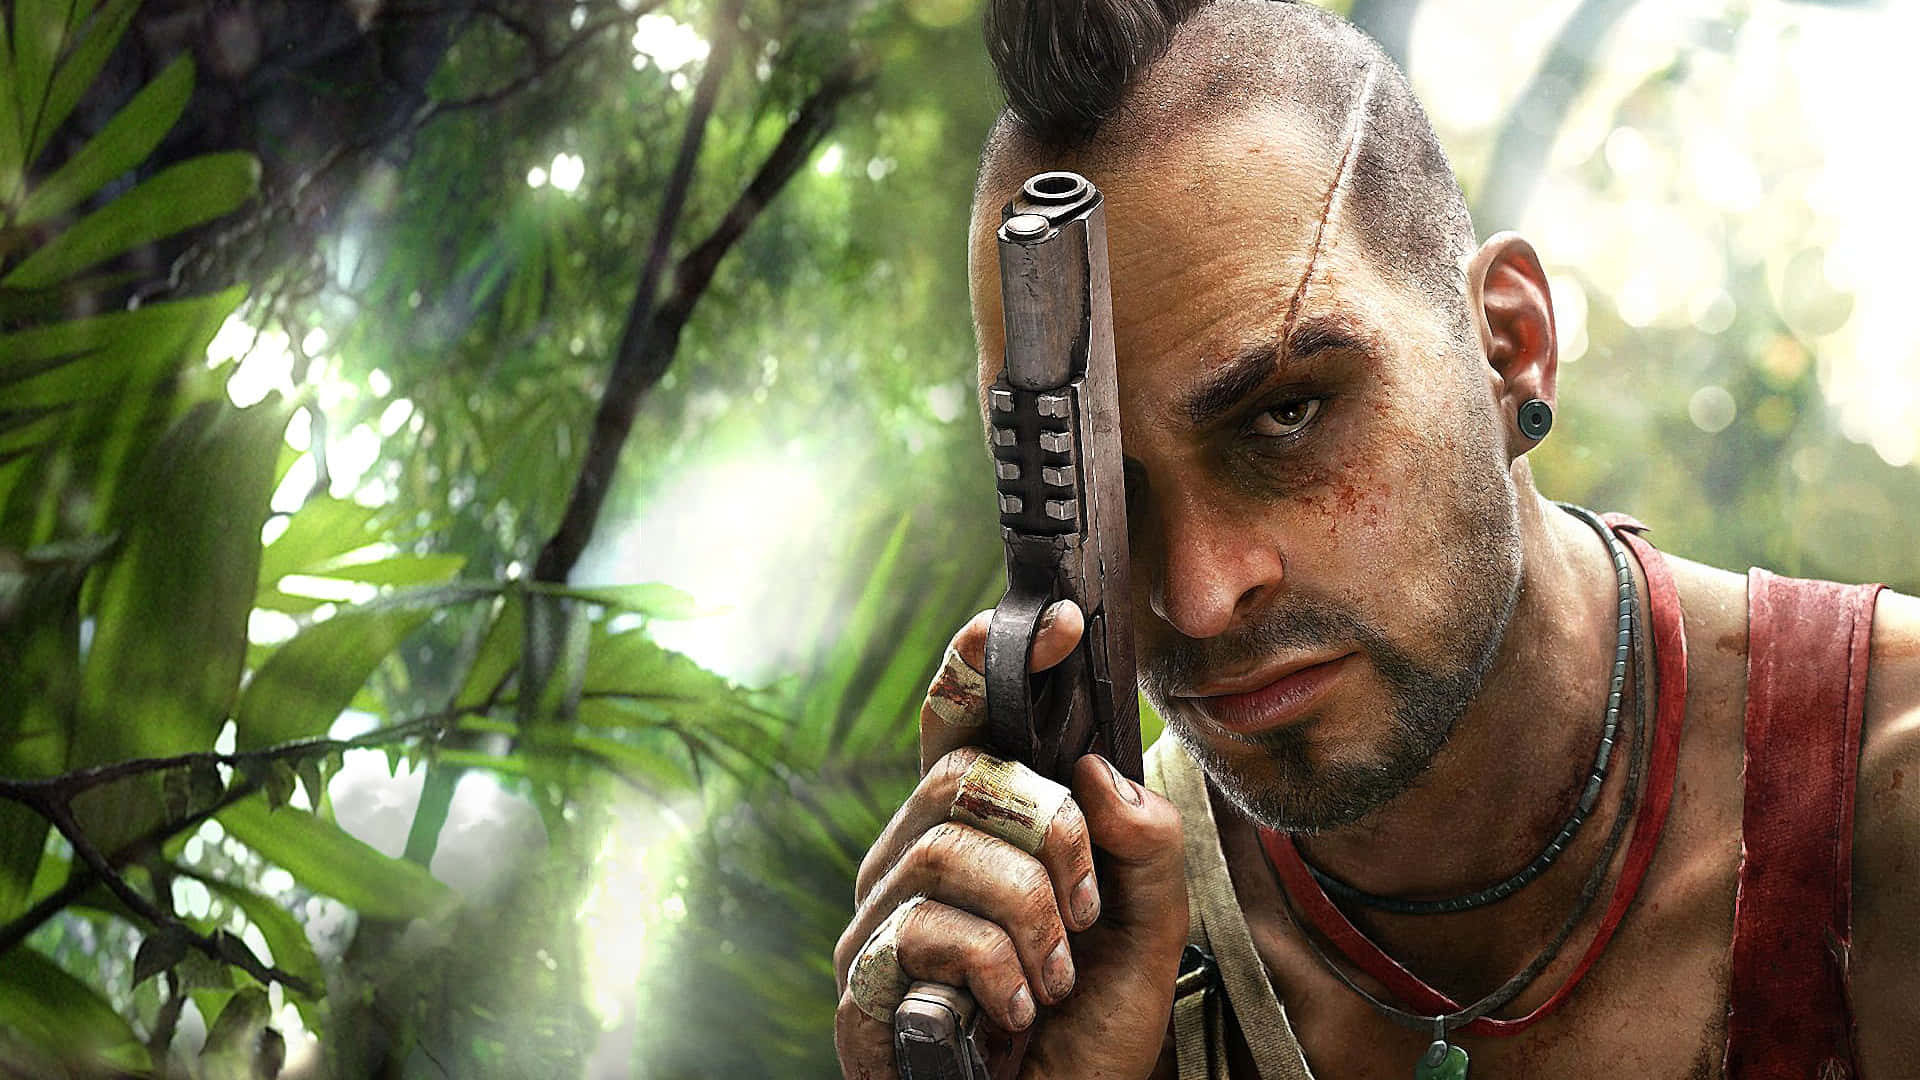 Welcome to the wild and beautiful world of Far Cry 3